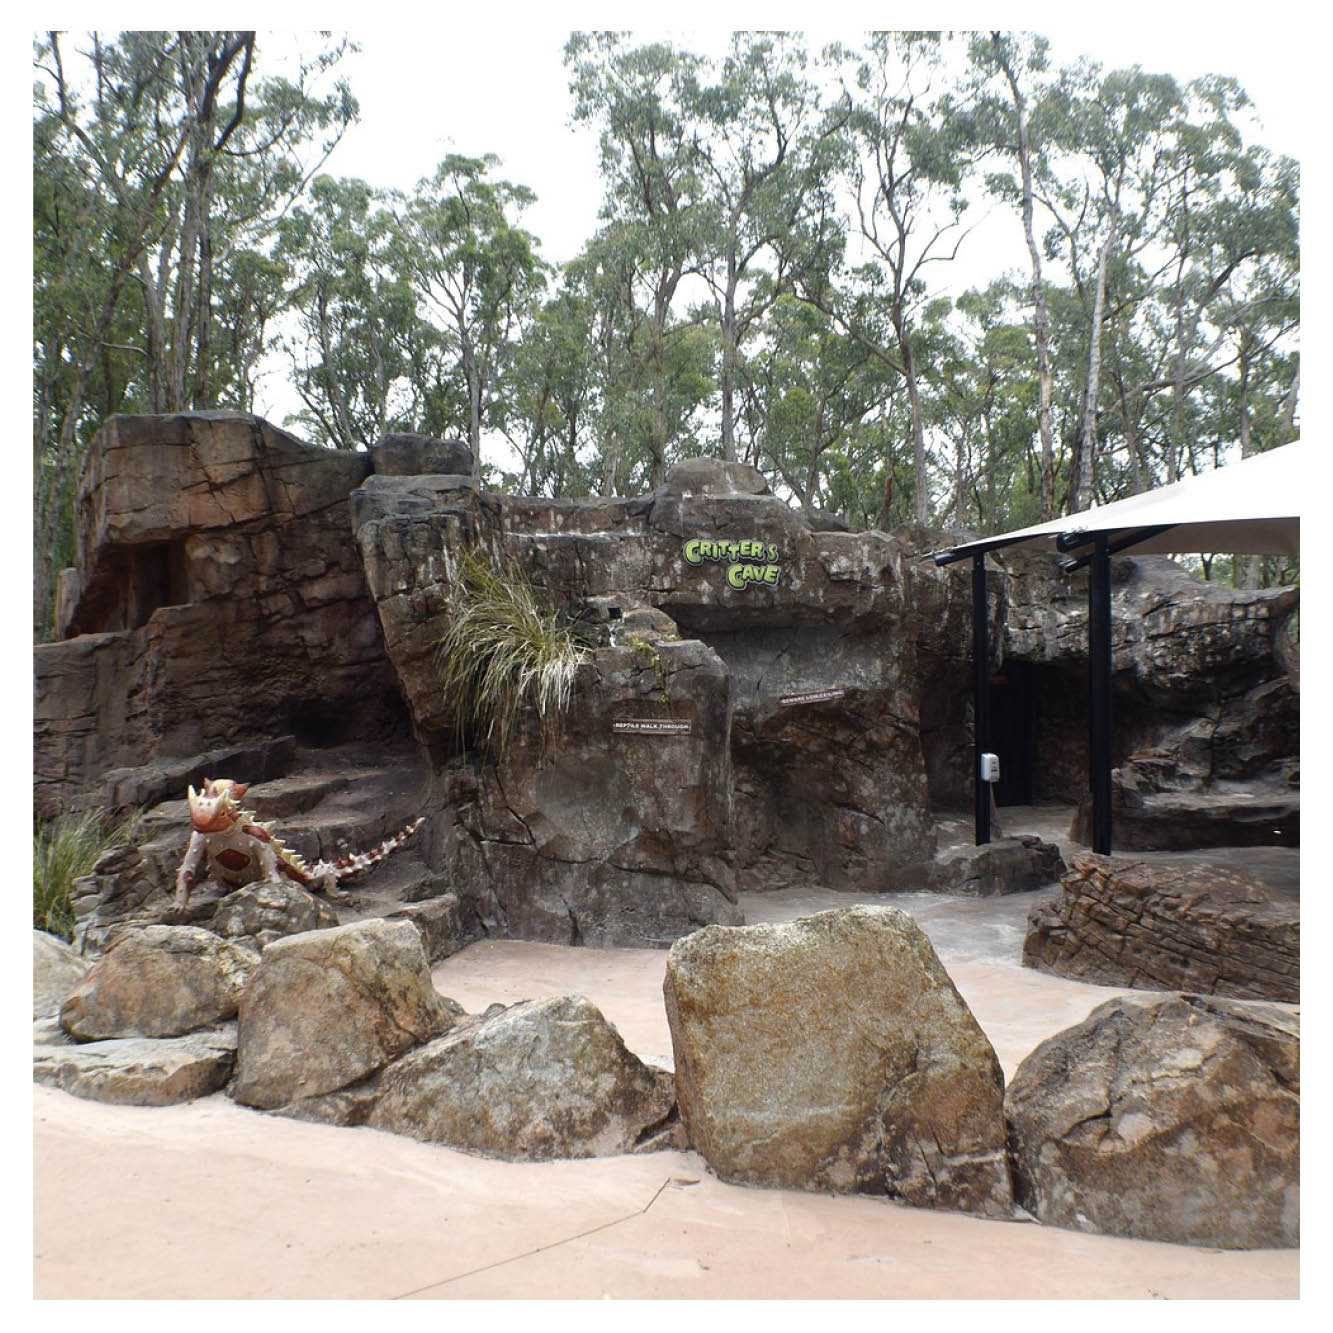 Gumbuya Critters Cave - outside view